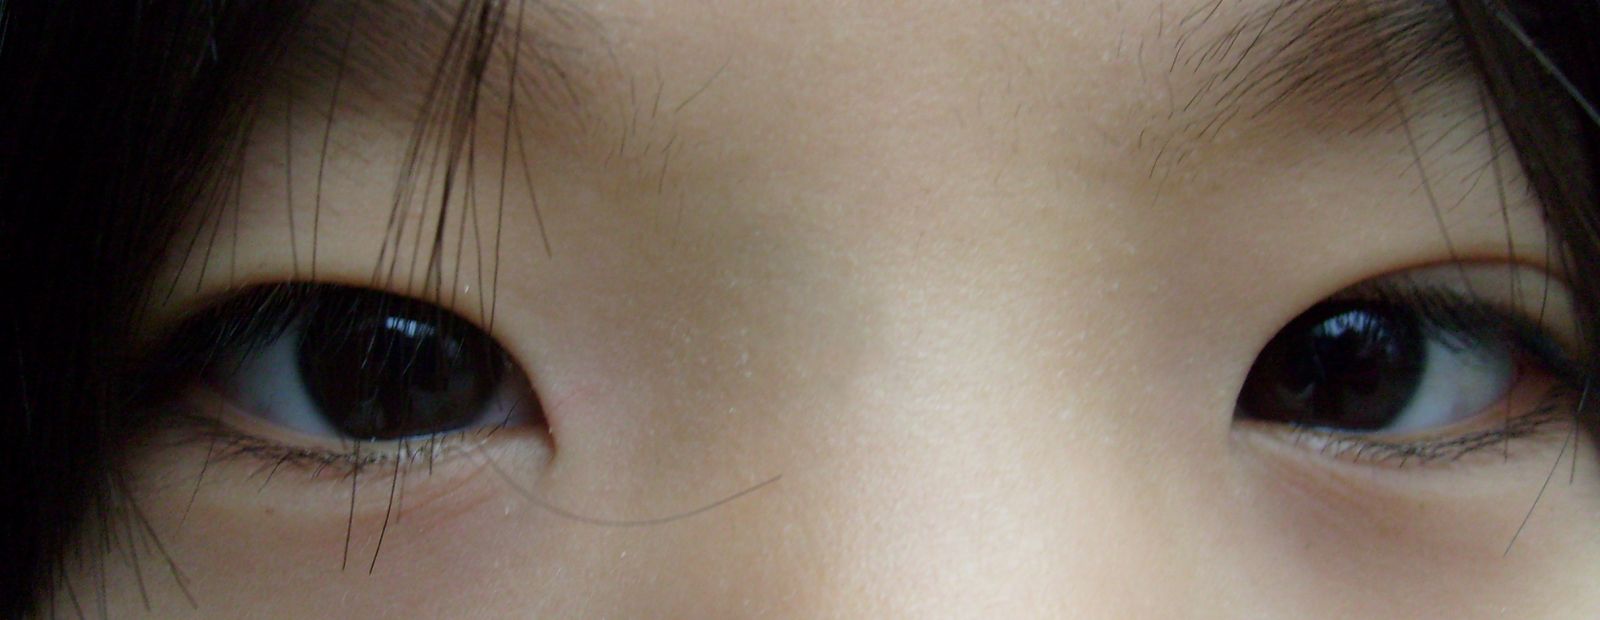 close up picture of a child's eyes